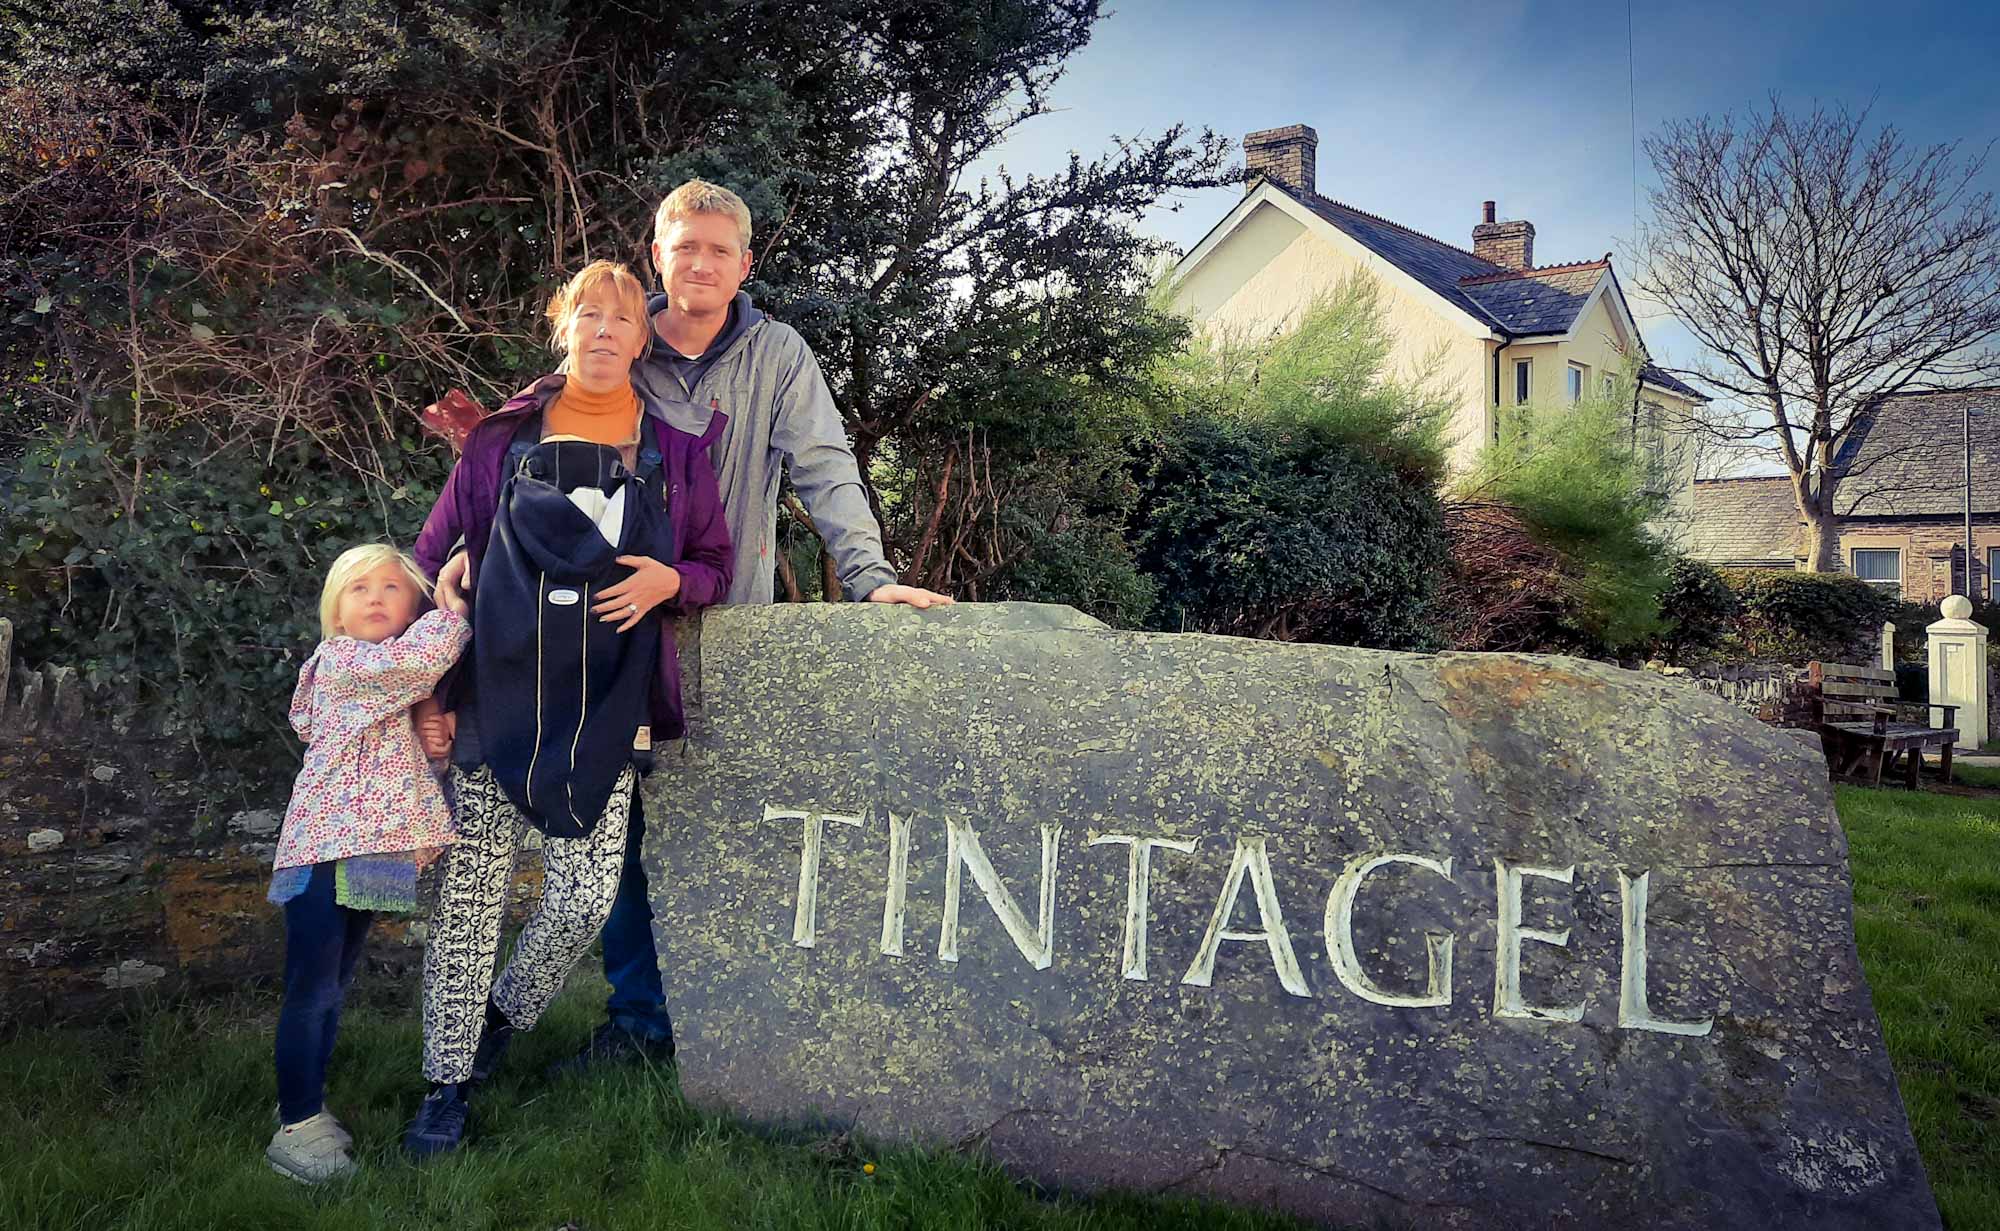 Family stood by a large, stone town sign, at the entrance to Tintagel, Cornwall, UK